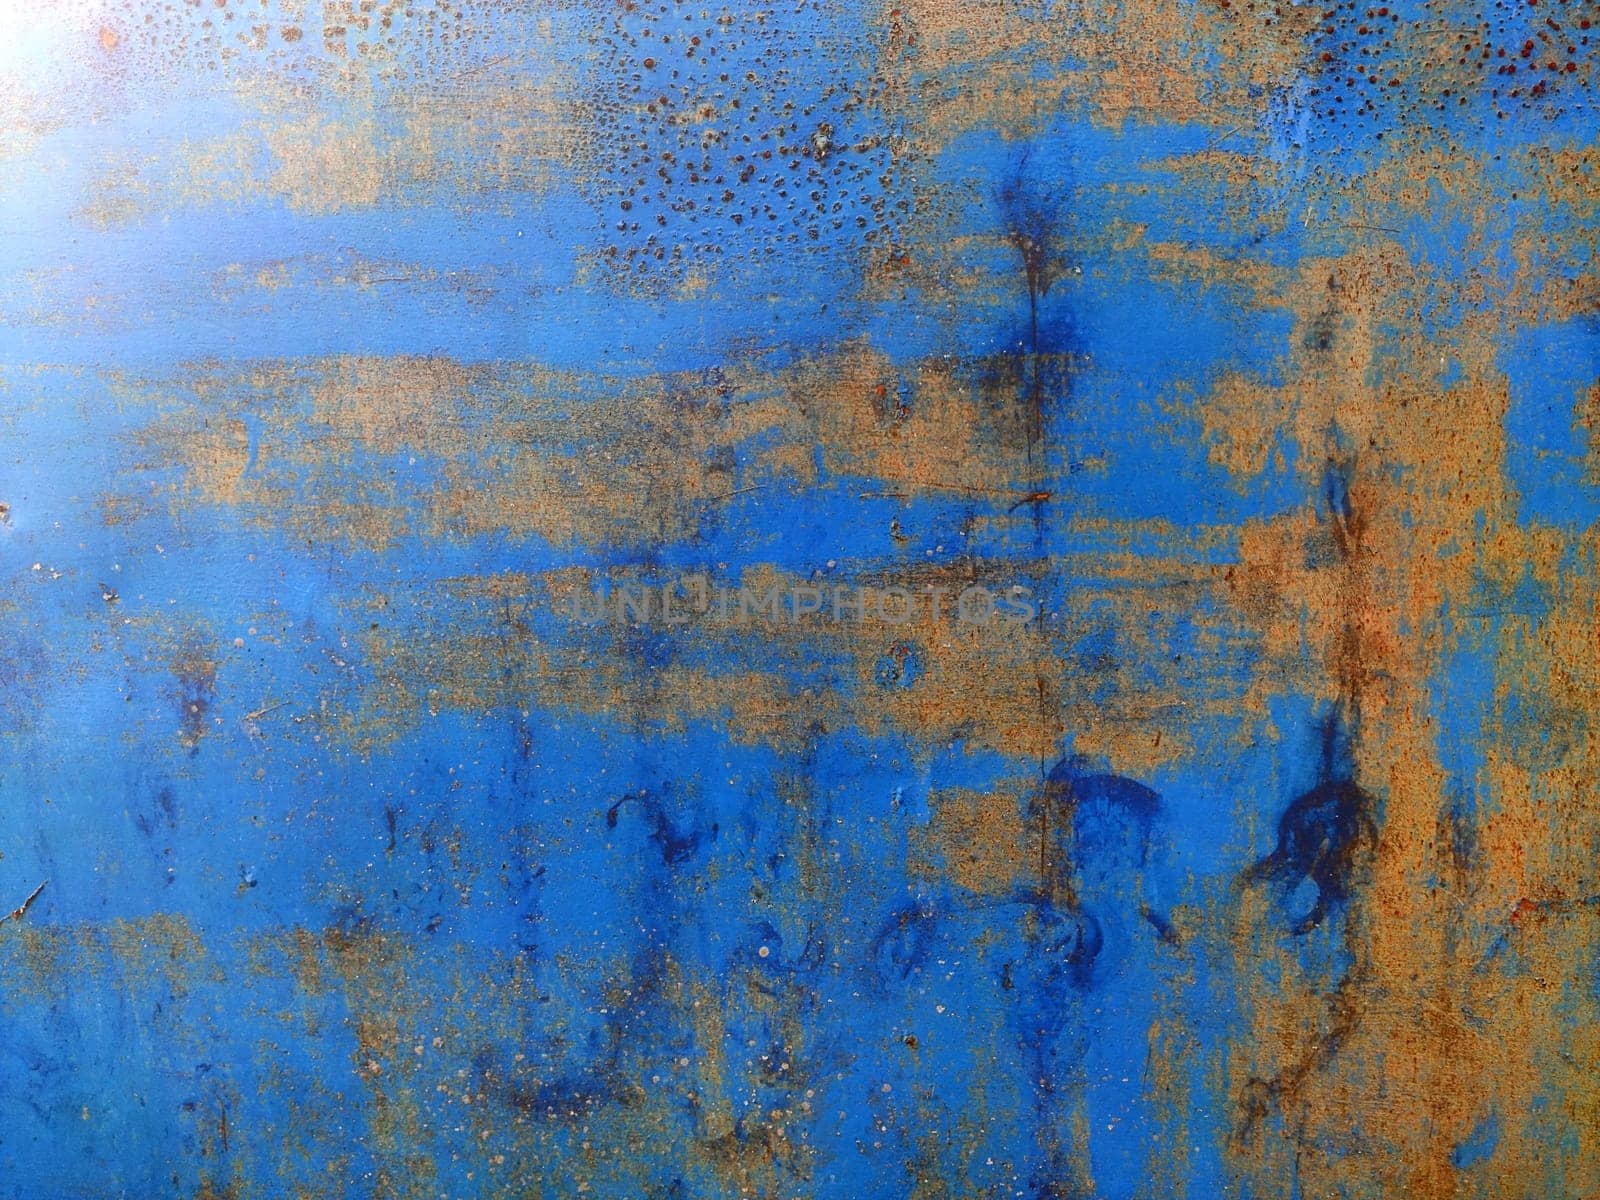 Marks and rust patterns on metal containers. Rusty corrosion and oxidized background. Worn metallic iron rusty metal background by OnPhotoUa